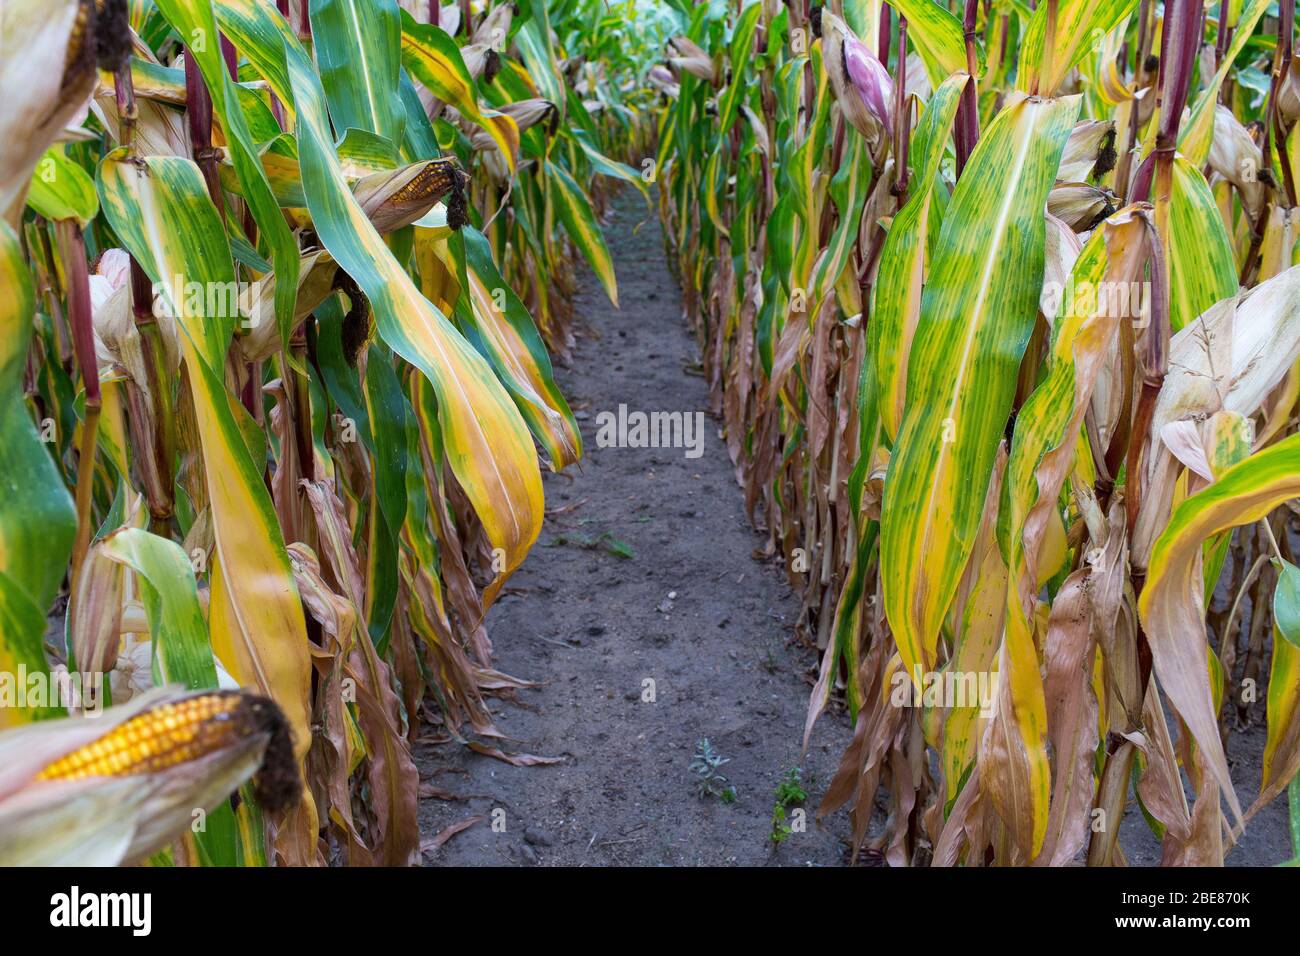 Organic corn is grown for local production close the the town of Etel, in Western France. Stock Photo